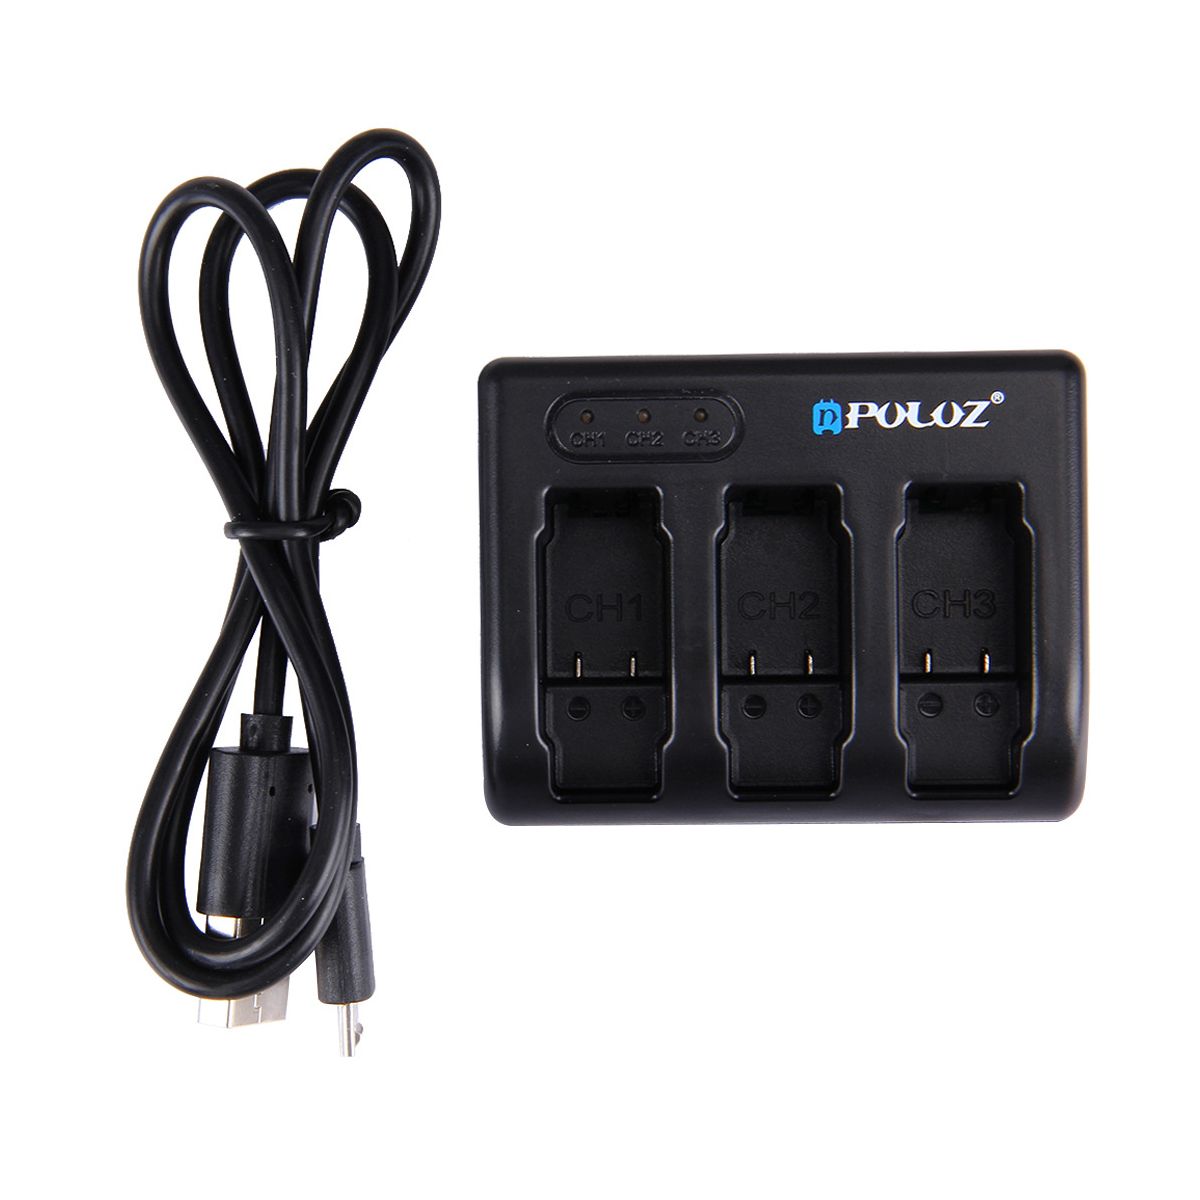 PULUZ-3-Channel-Battery-Charger-With-Micro-USB-CType-C-Port-For-GoPro-HERO506-1636055